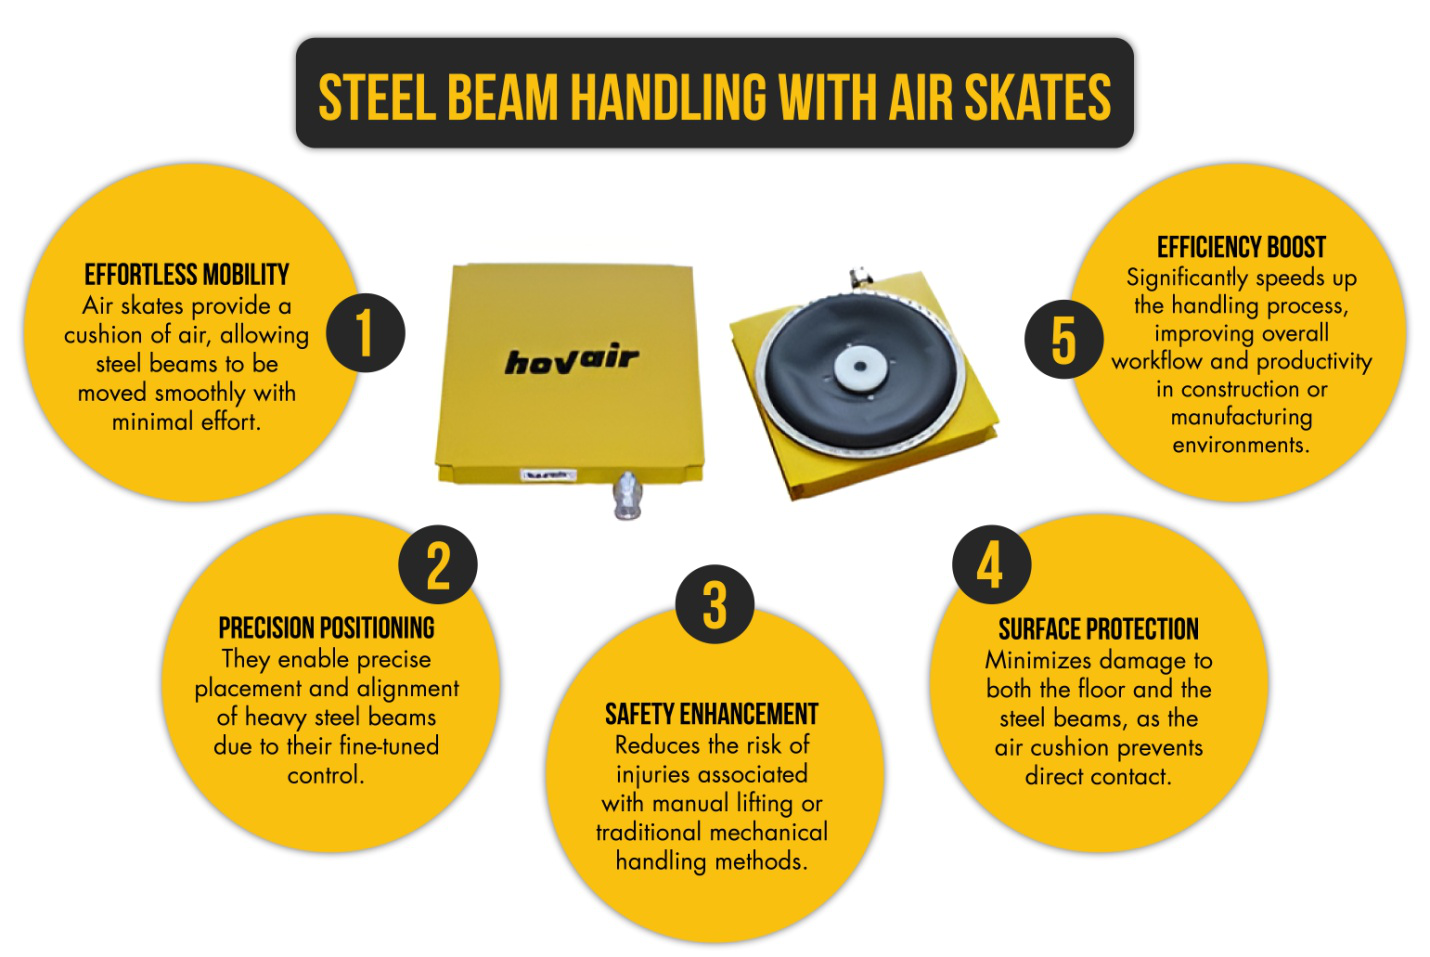 An infographic explaining steel beam handling with air skates